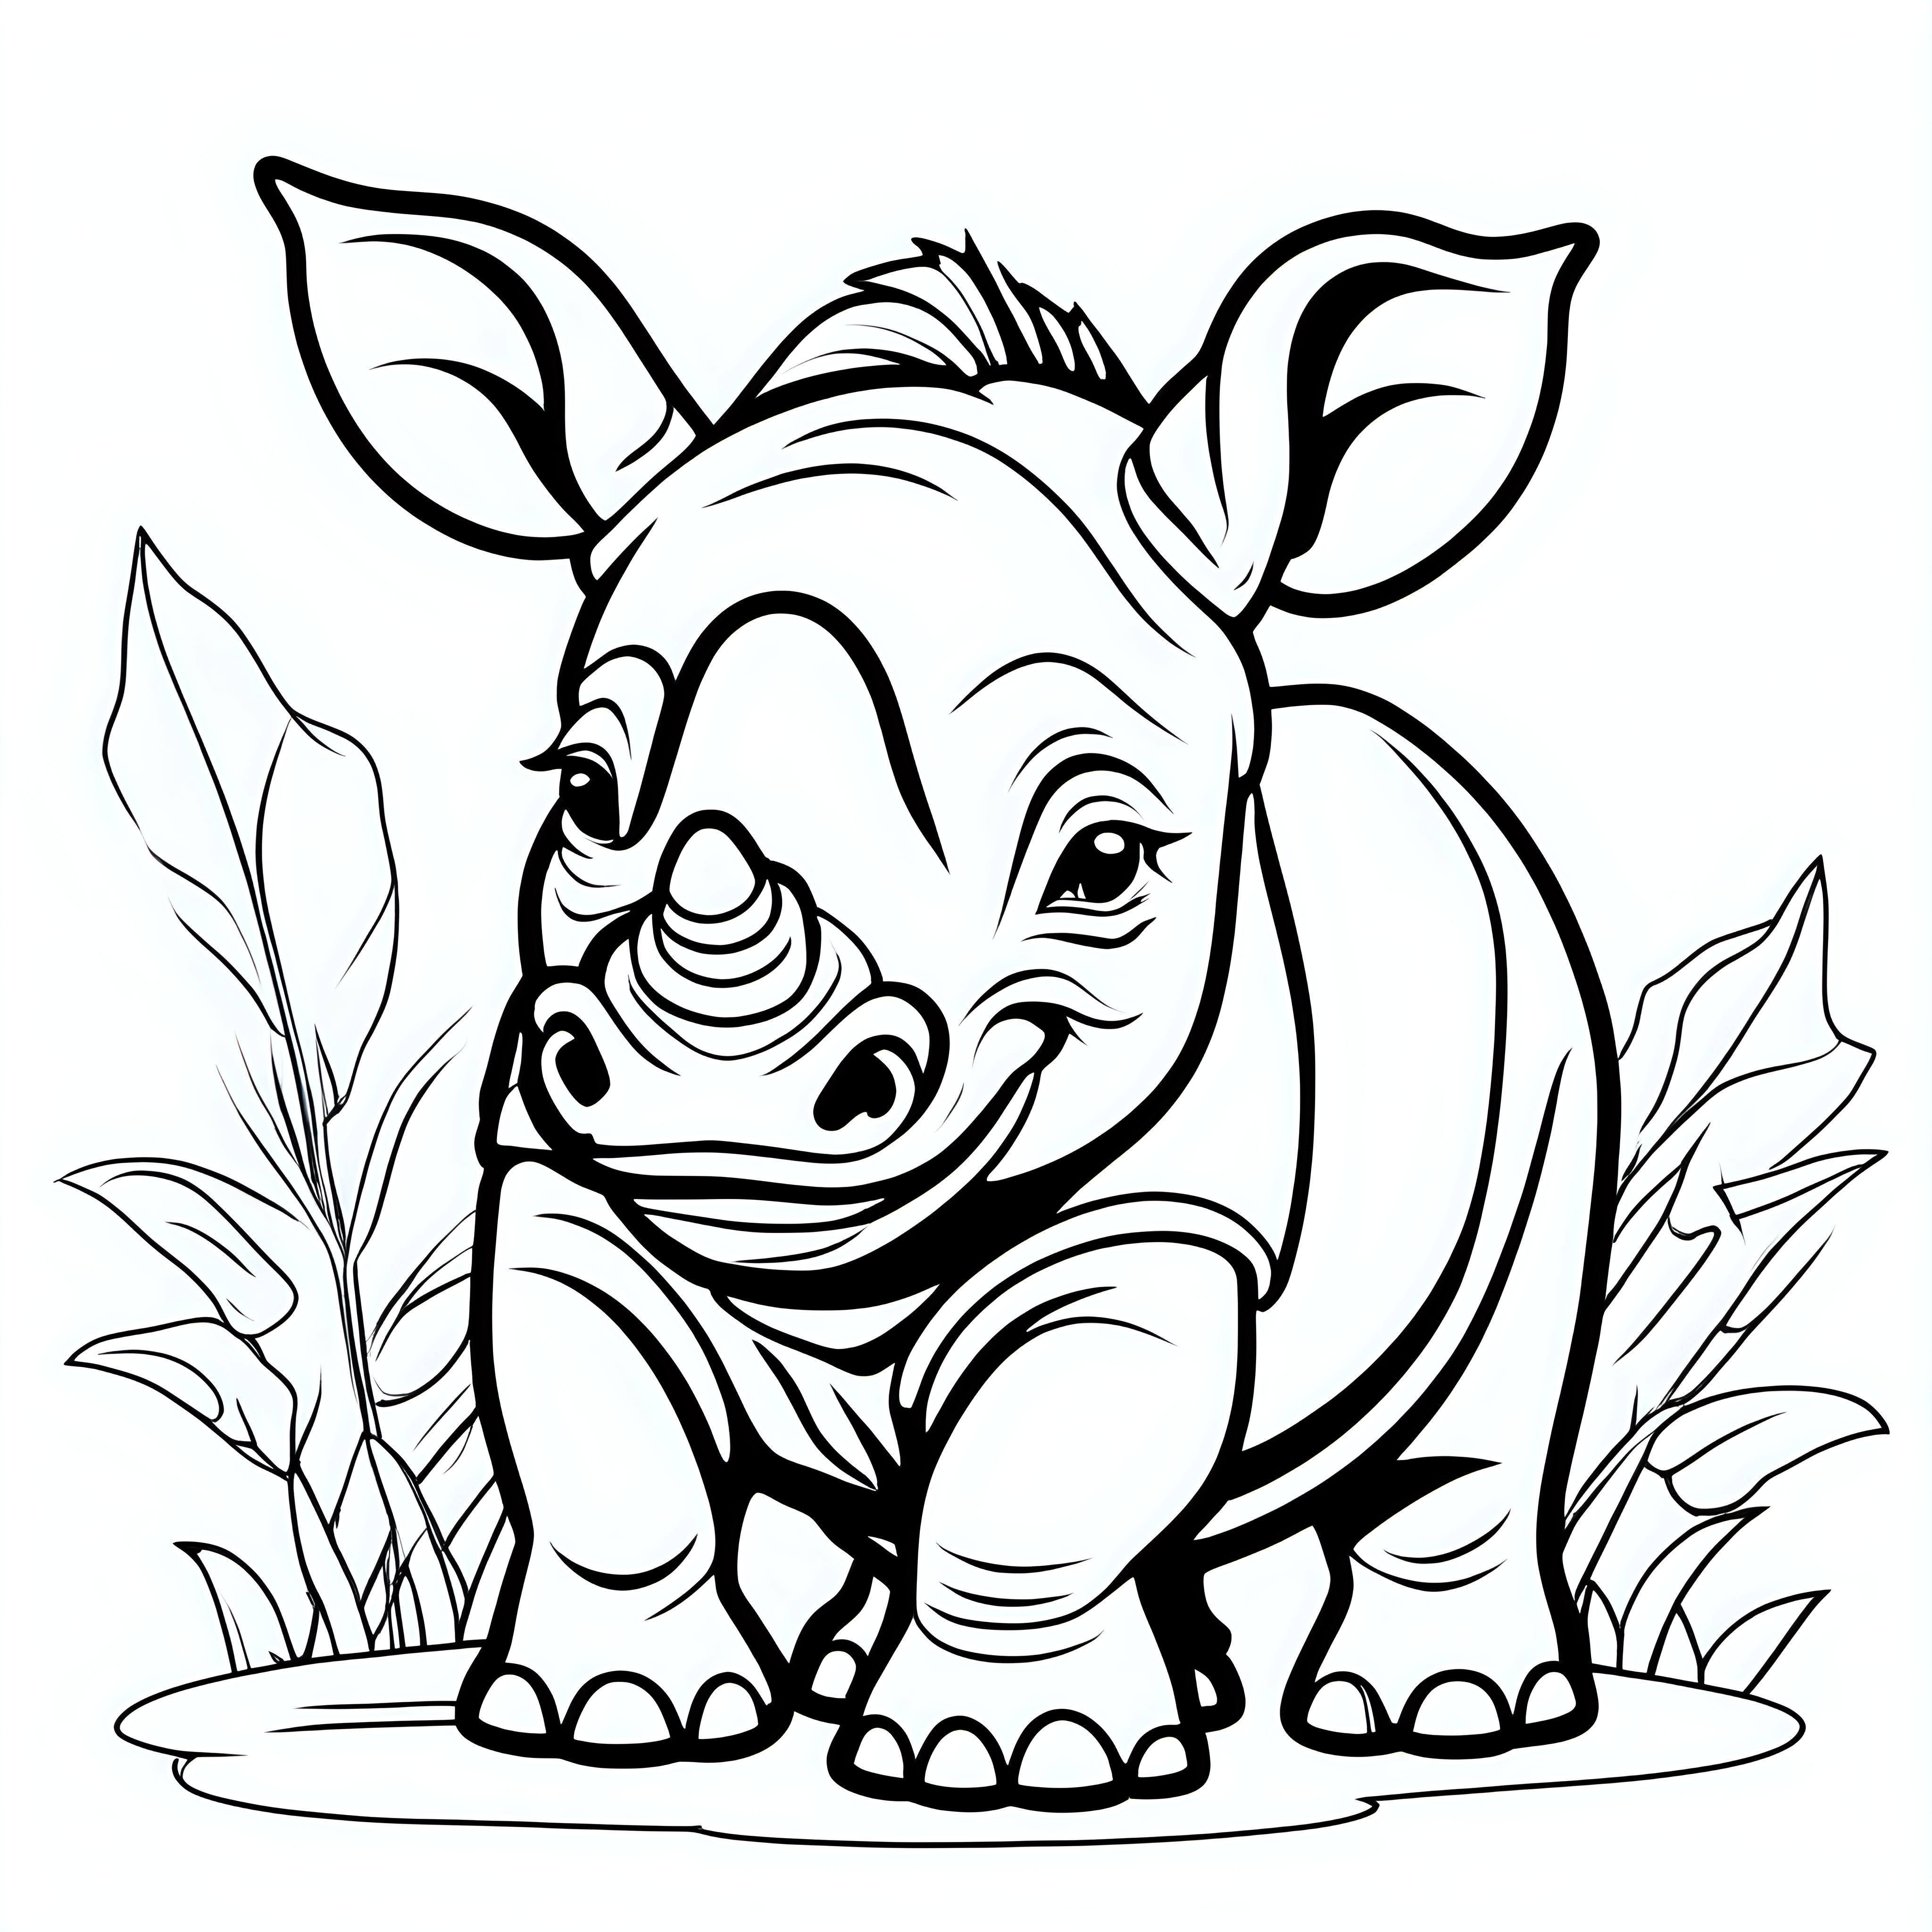 draw a cute baby rhino with only the